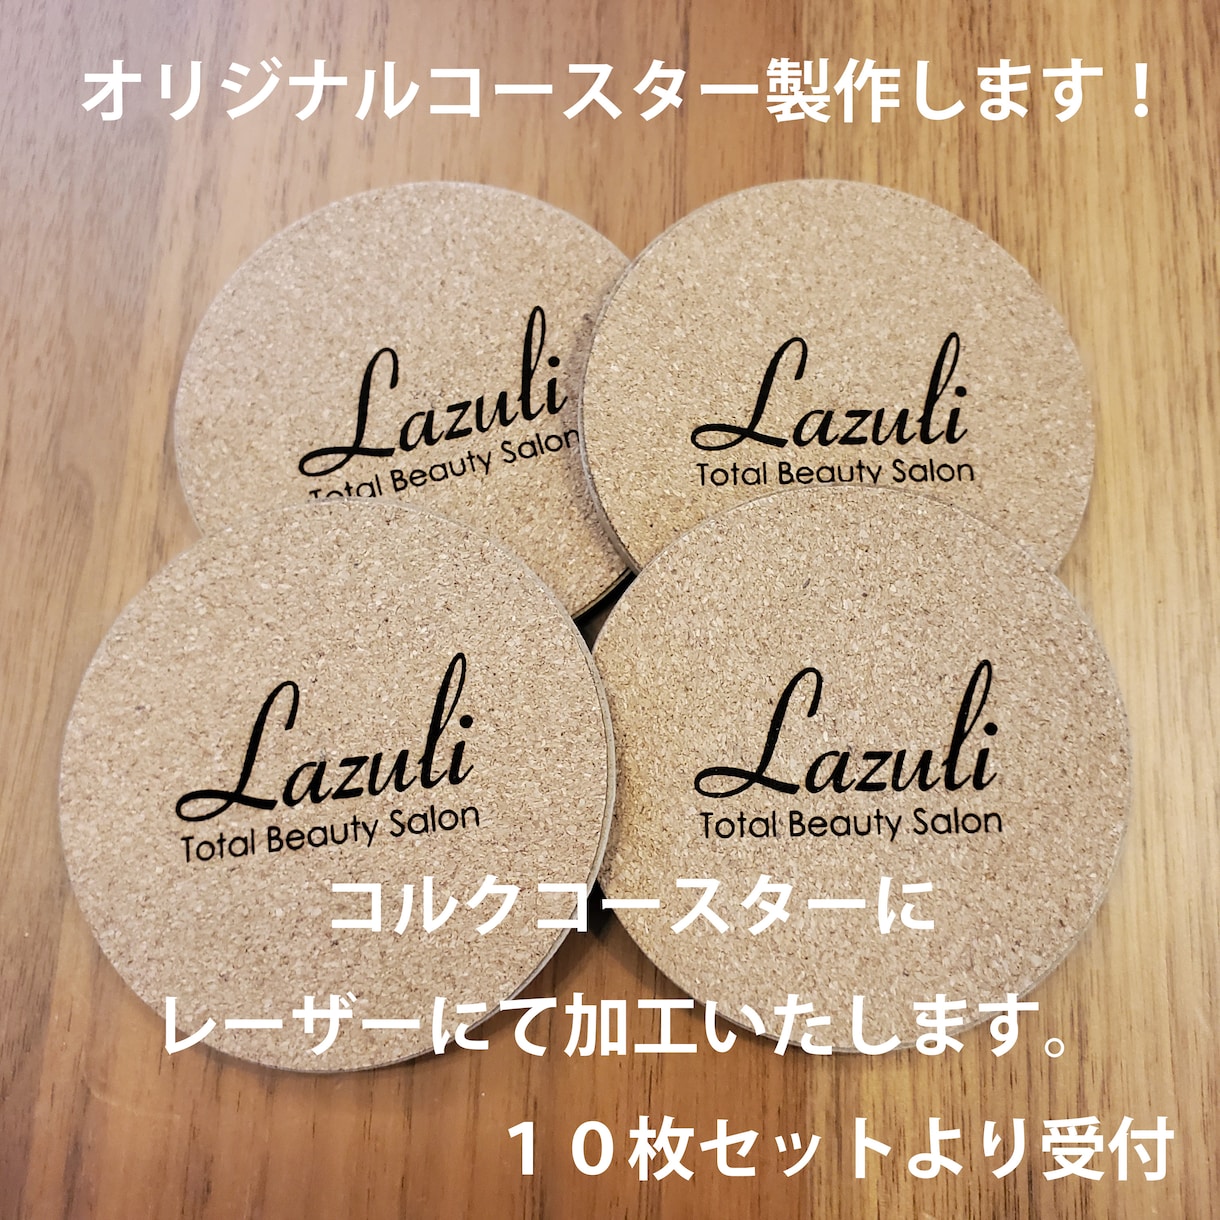 💬 Coco Nala ｜ We will produce cork coasters with laser processing NAO LASER 5.0 …